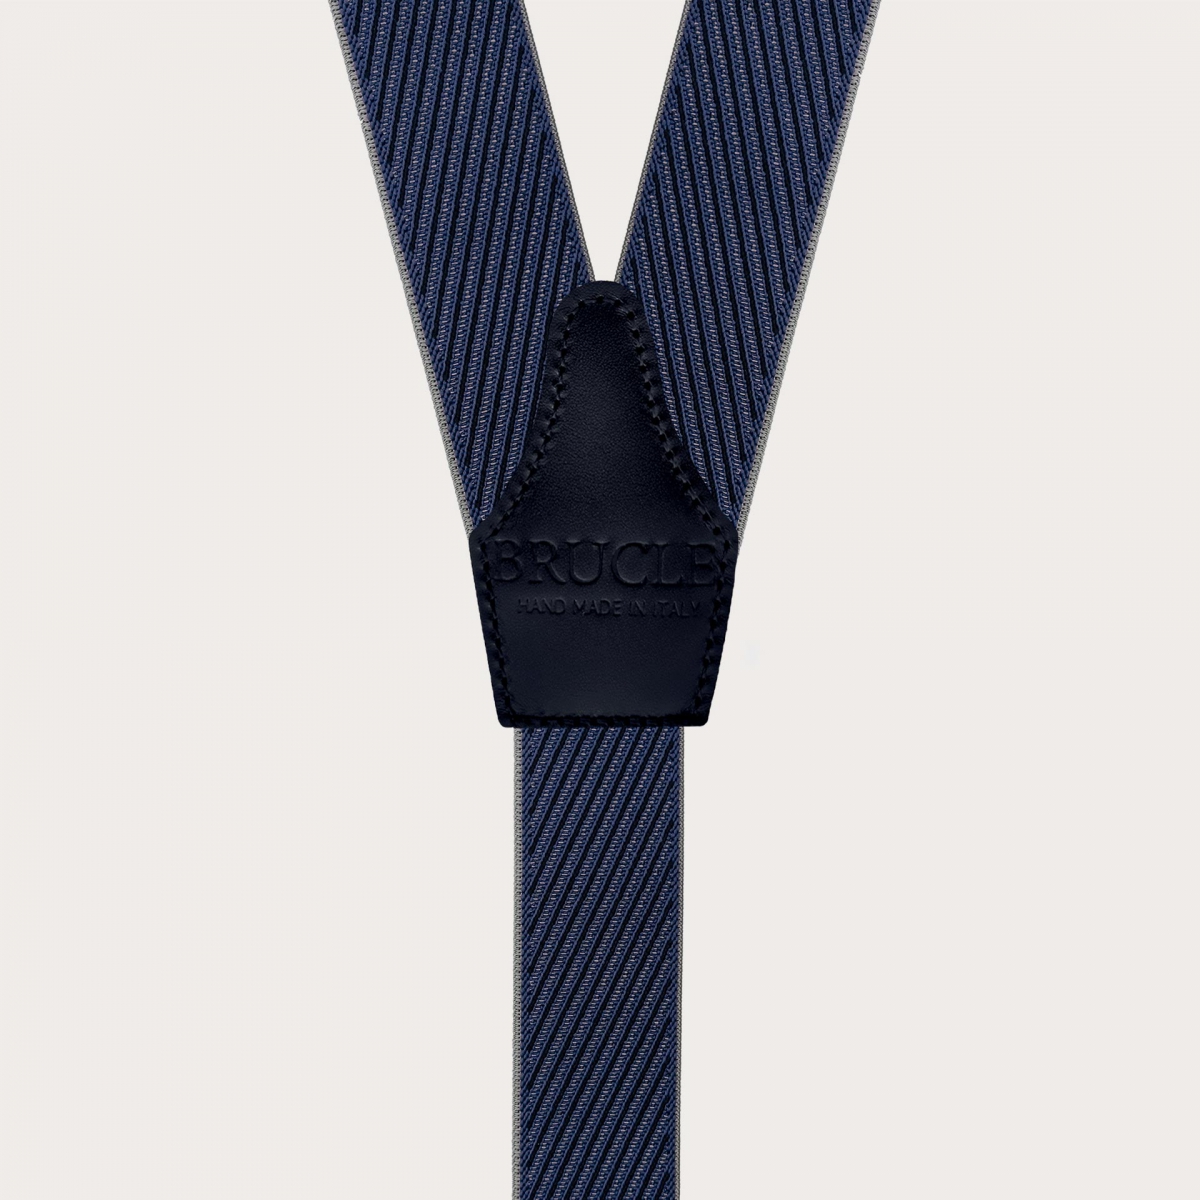 Elegant suspenders with diagonal stripes in blue, grey, and navy, dual use